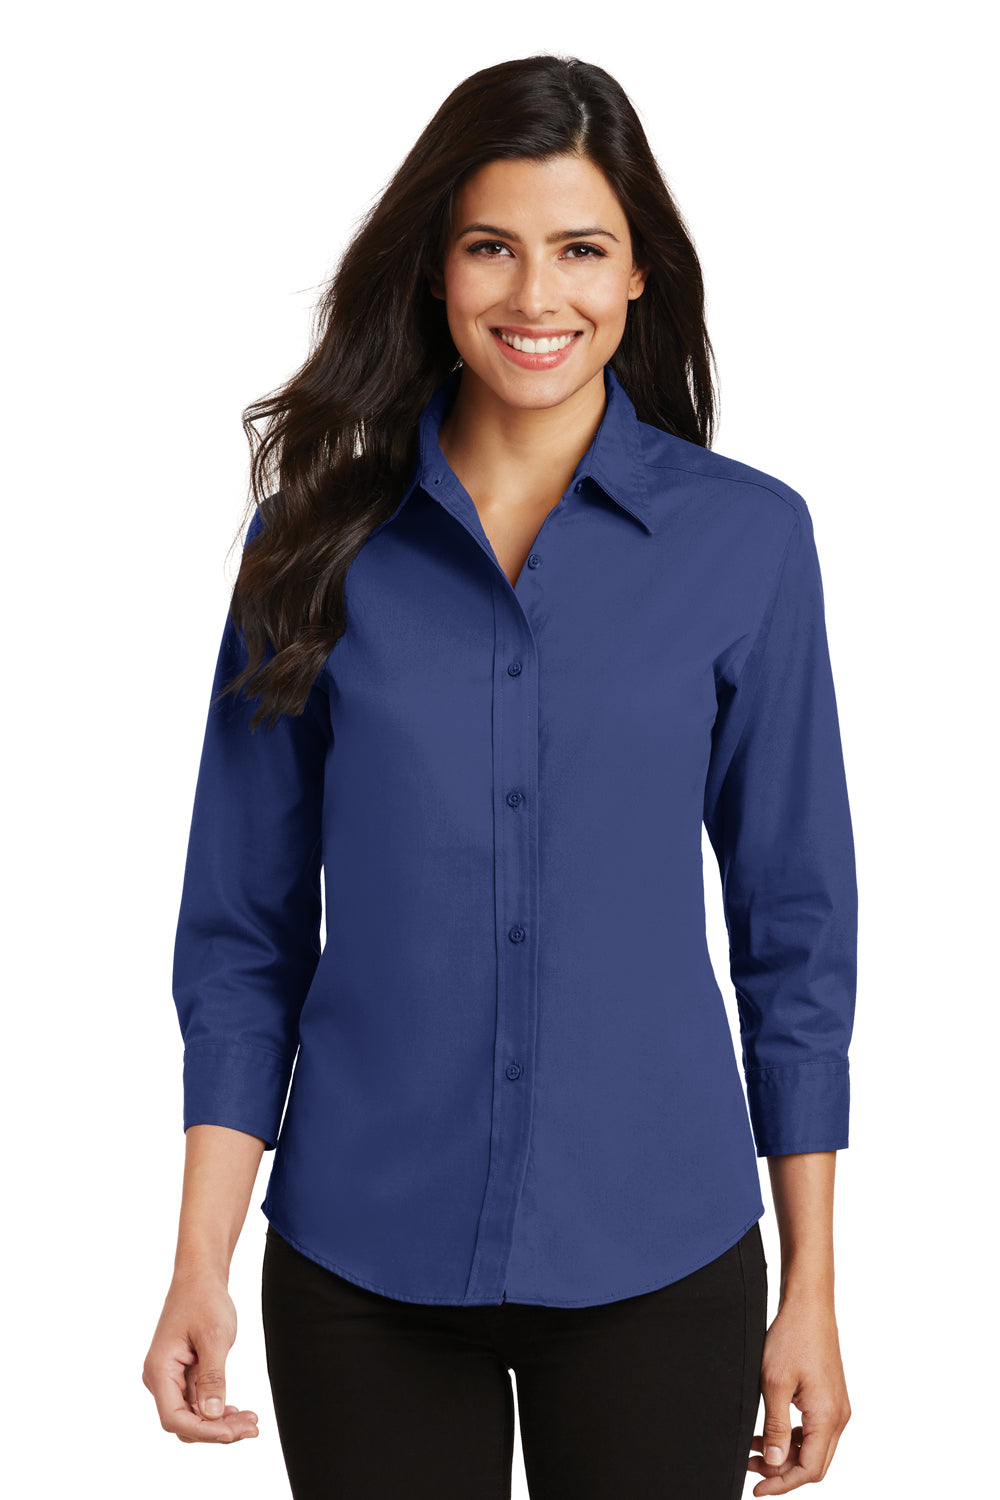 Port Authority L612 Womens Easy Care Wrinkle Resistant 3/4 Sleeve Button Down Shirt Mediterranean Blue Front